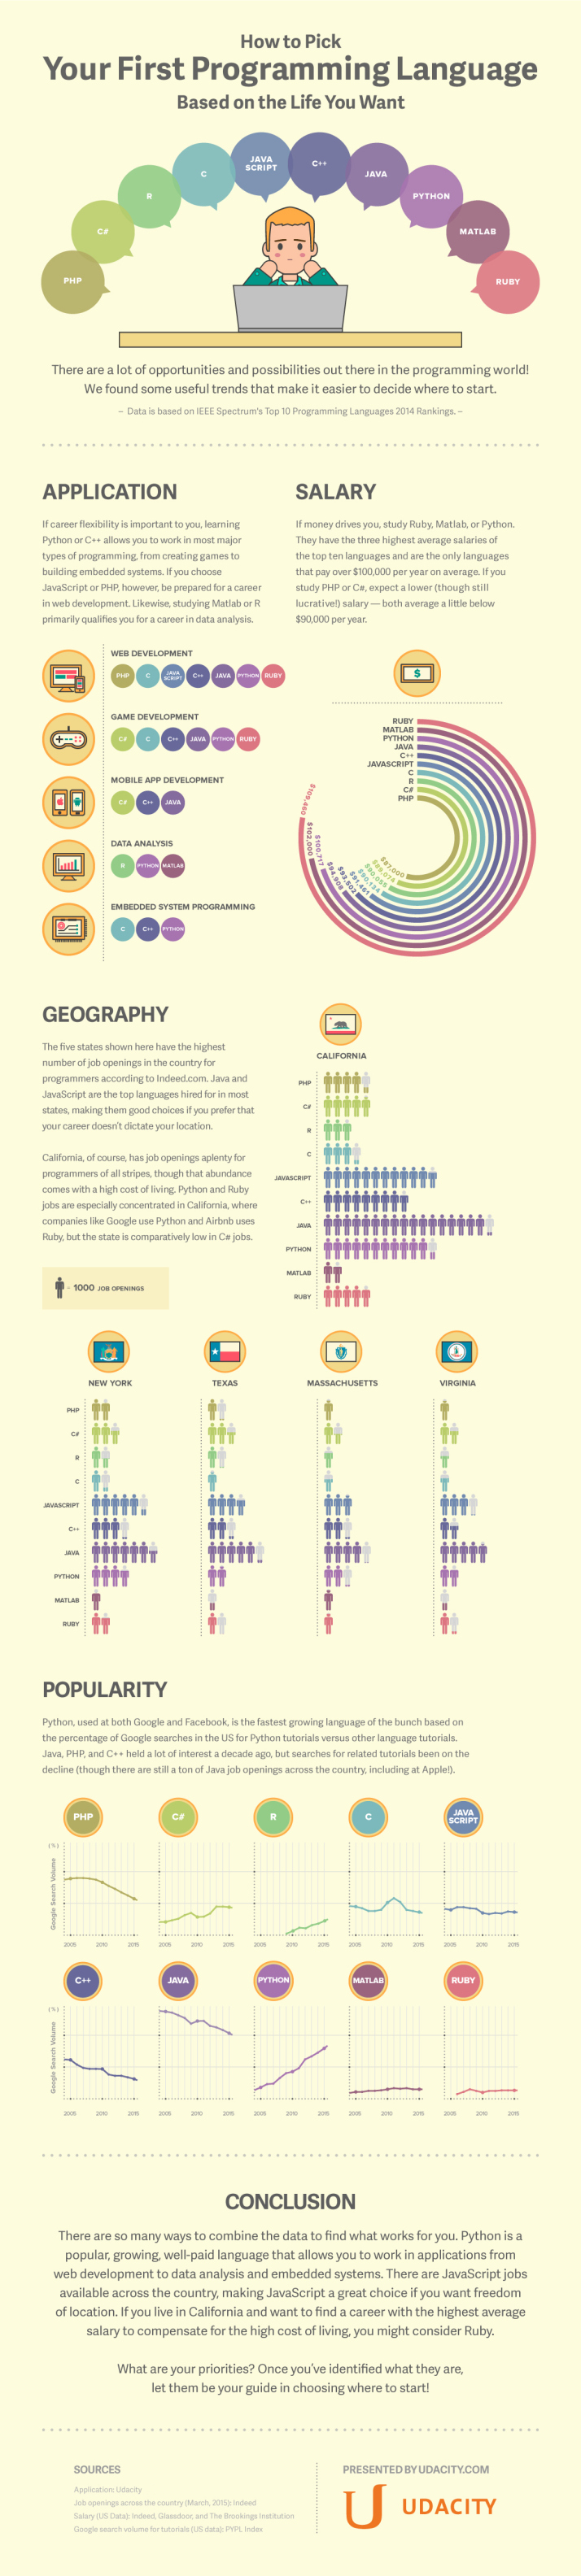 How to Pick Your First Programming Language infographic